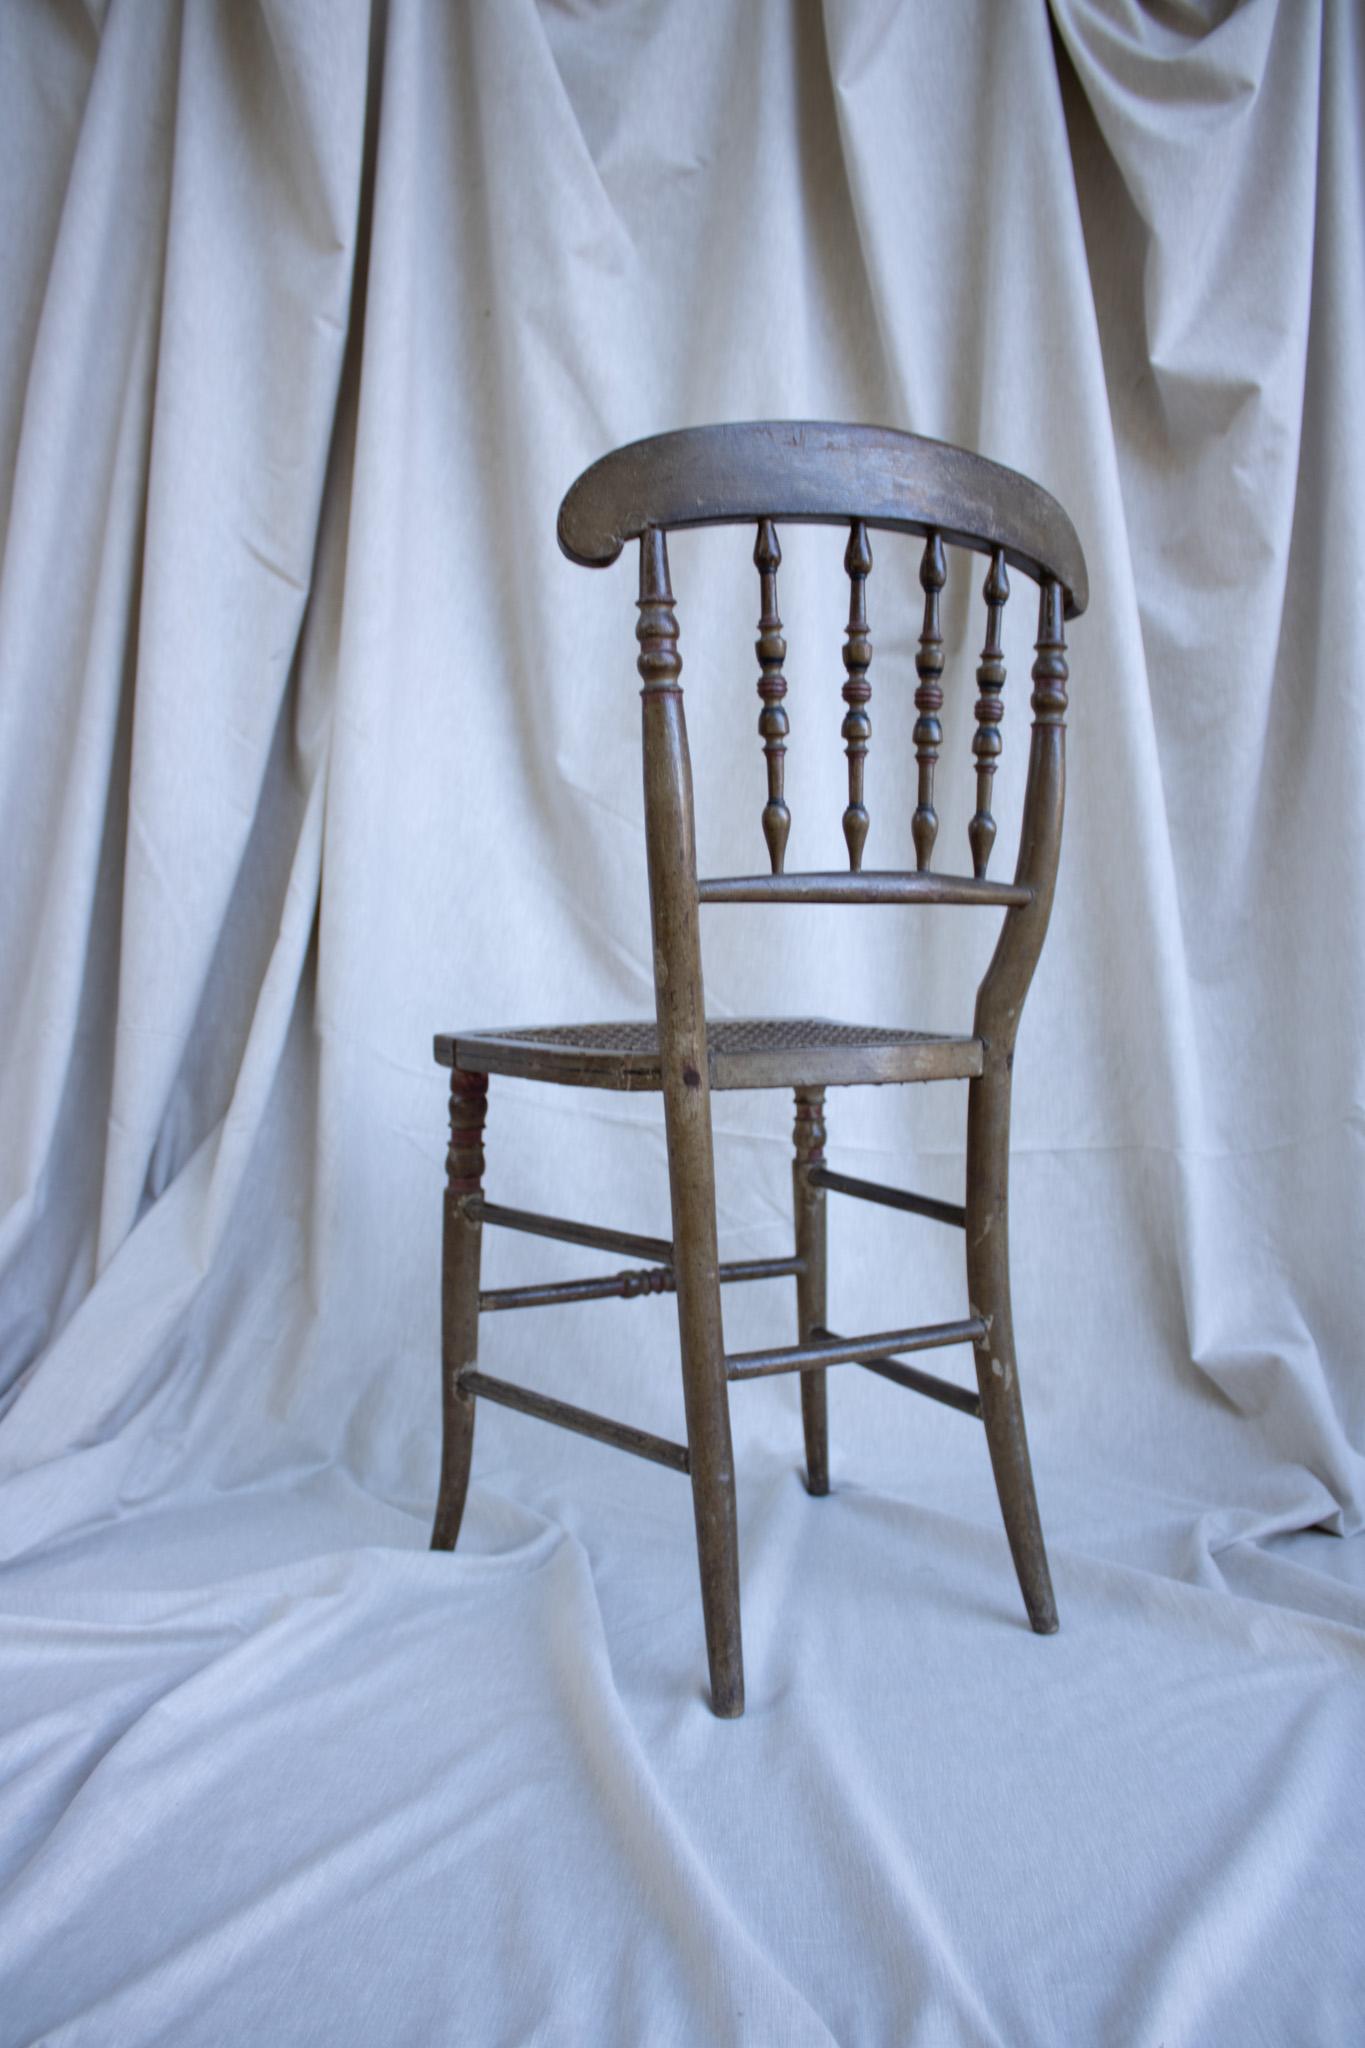 Pair of Painted Woodwork Chairs - XIX Century - Europe For Sale 1